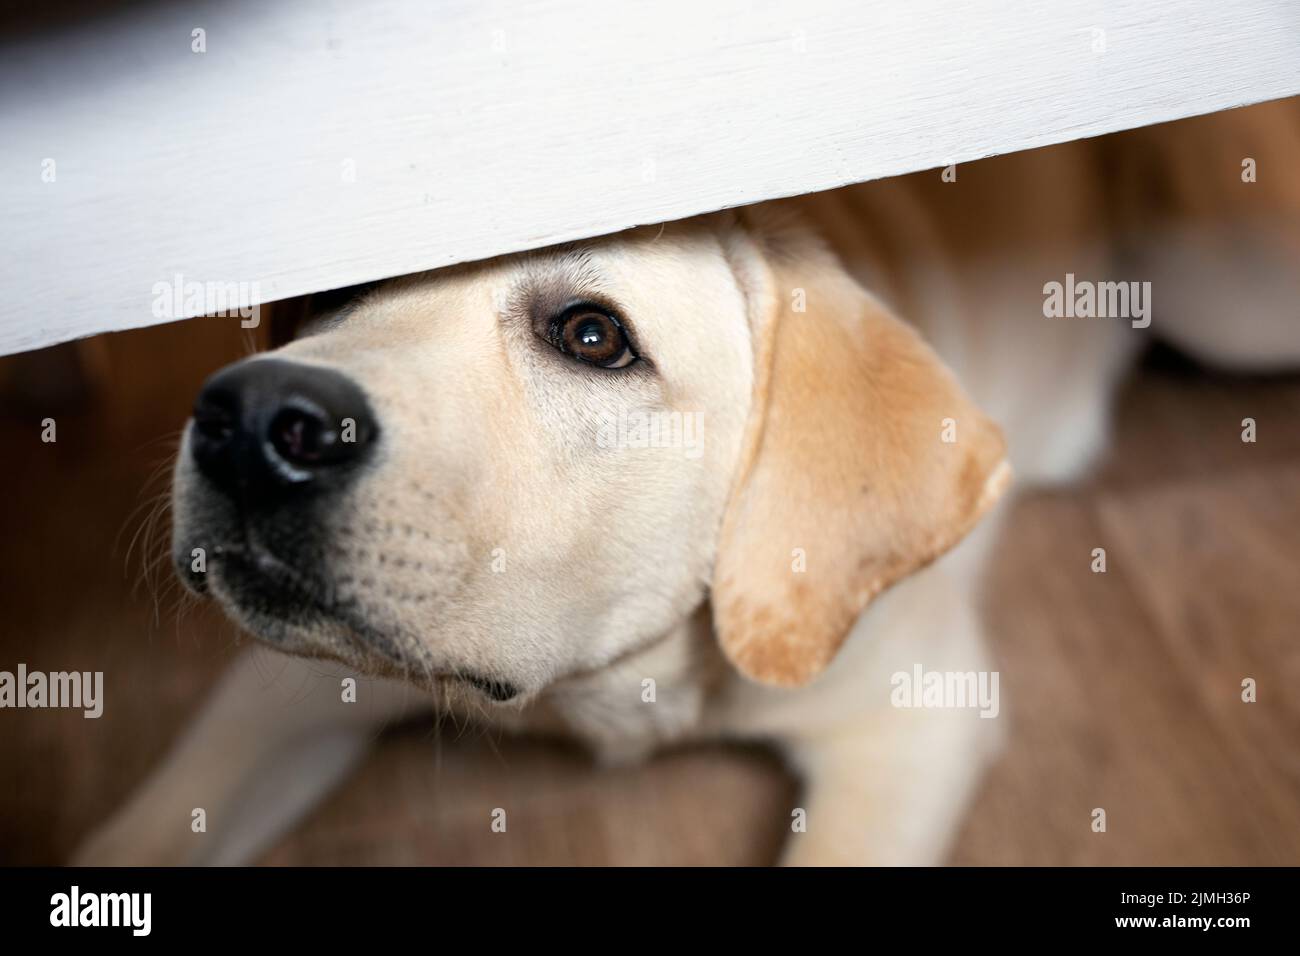 Begging dog looks out from under table, asks for food. Stock Photo